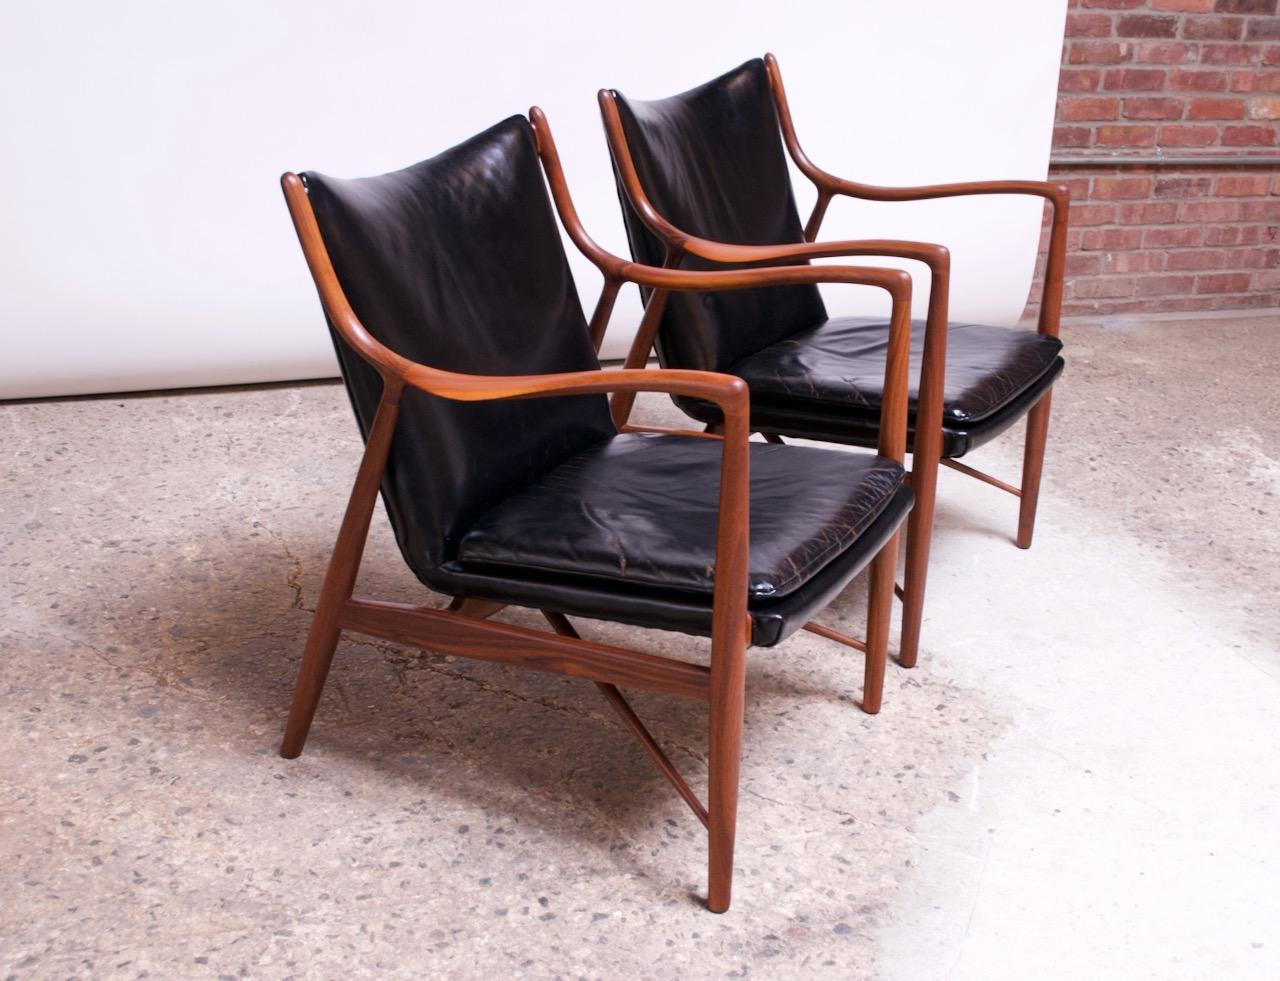 Pair of iconic circa 1950s Finn Juhl for Baker lounge chairs in walnut with original black leather upholstery (Baker model #409 1/2; the former Neils Vodder version is model #NV-45).
Sculpted walnut frames feature delicate contours and gracefully